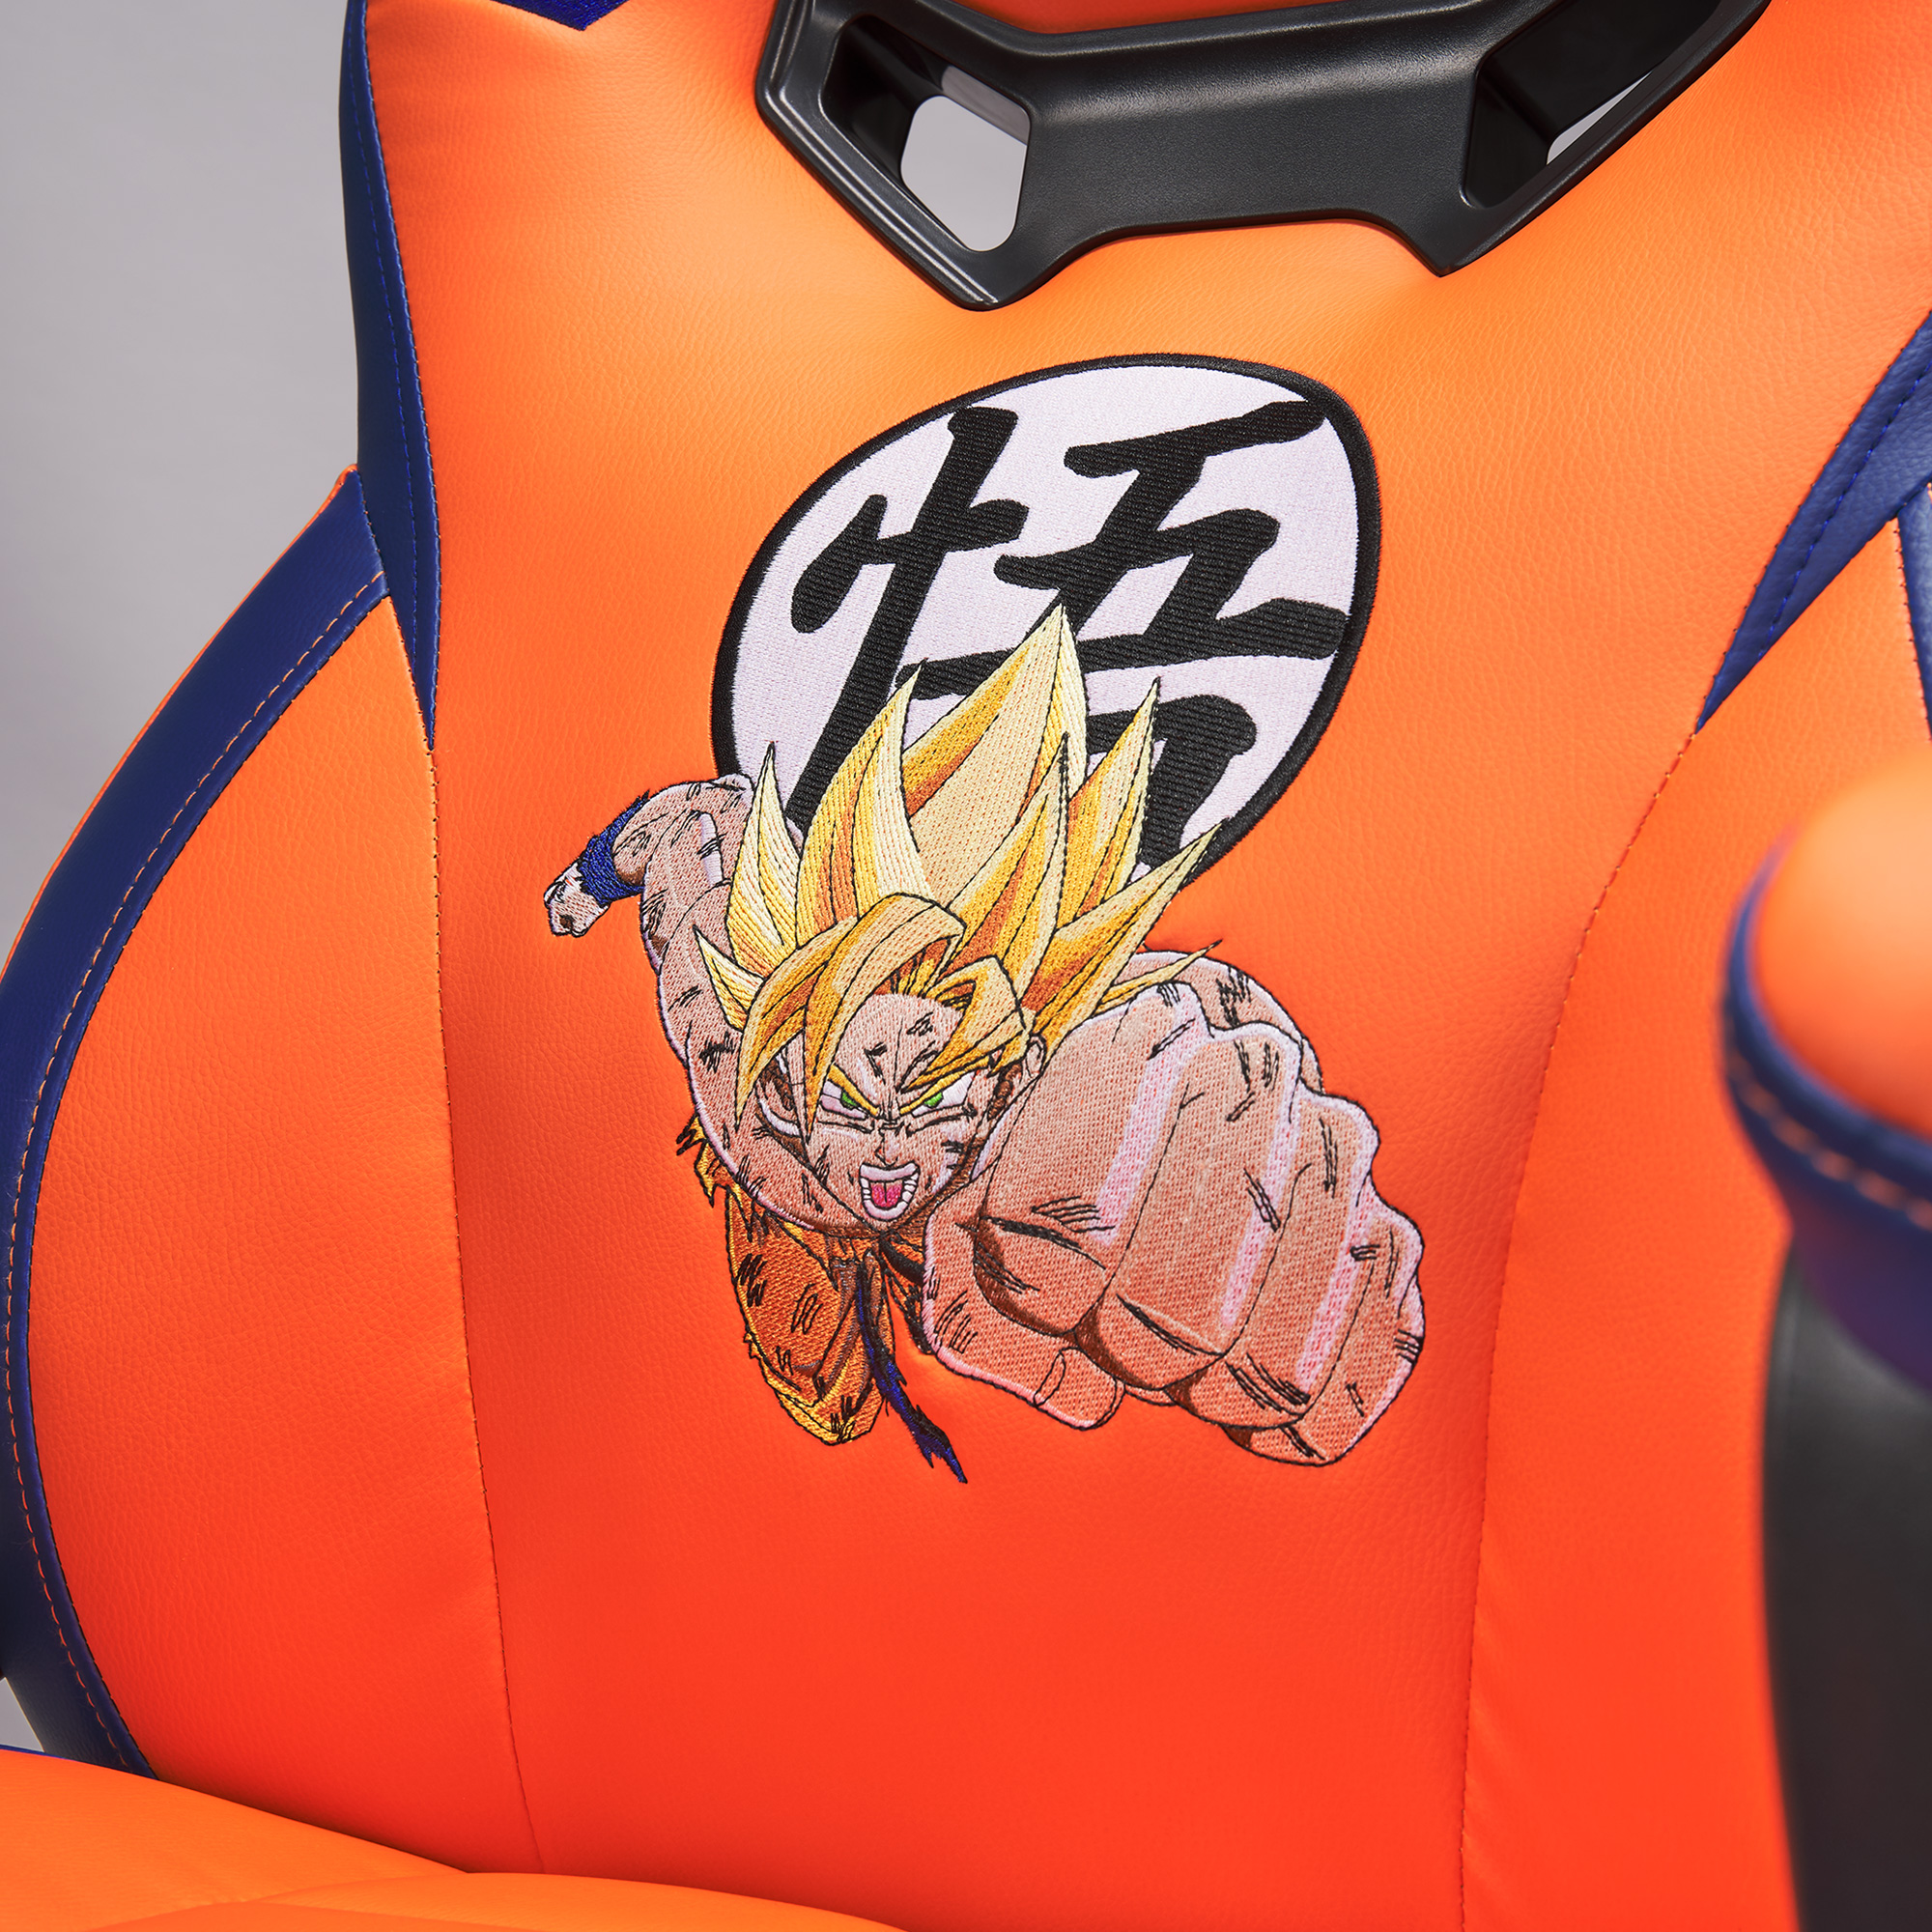 Chaise gaming sous licence officielle Dragon Ball Z | Subsonic